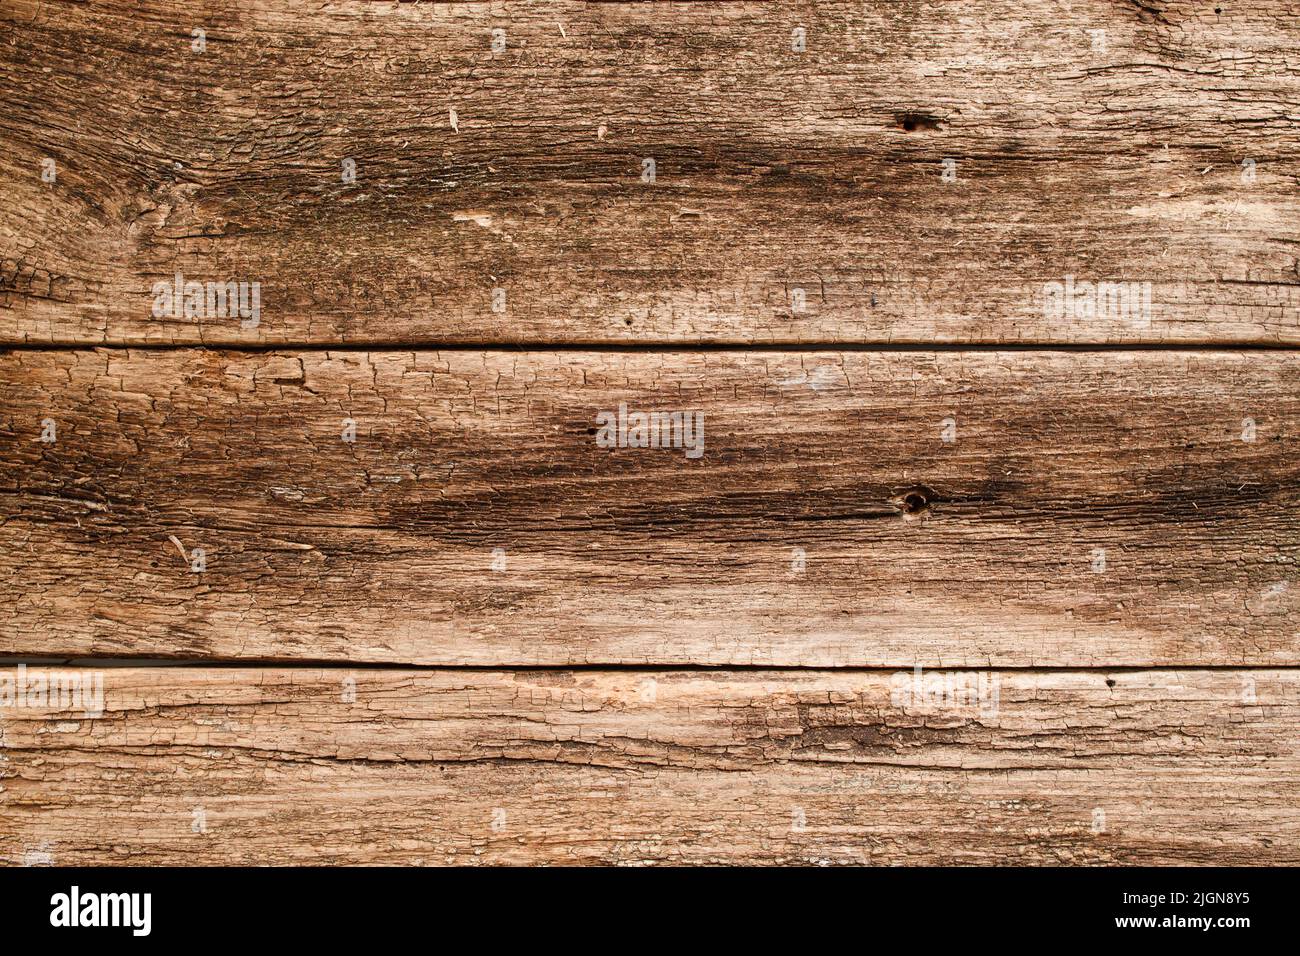 Shabby wooden background, free space Stock Photo